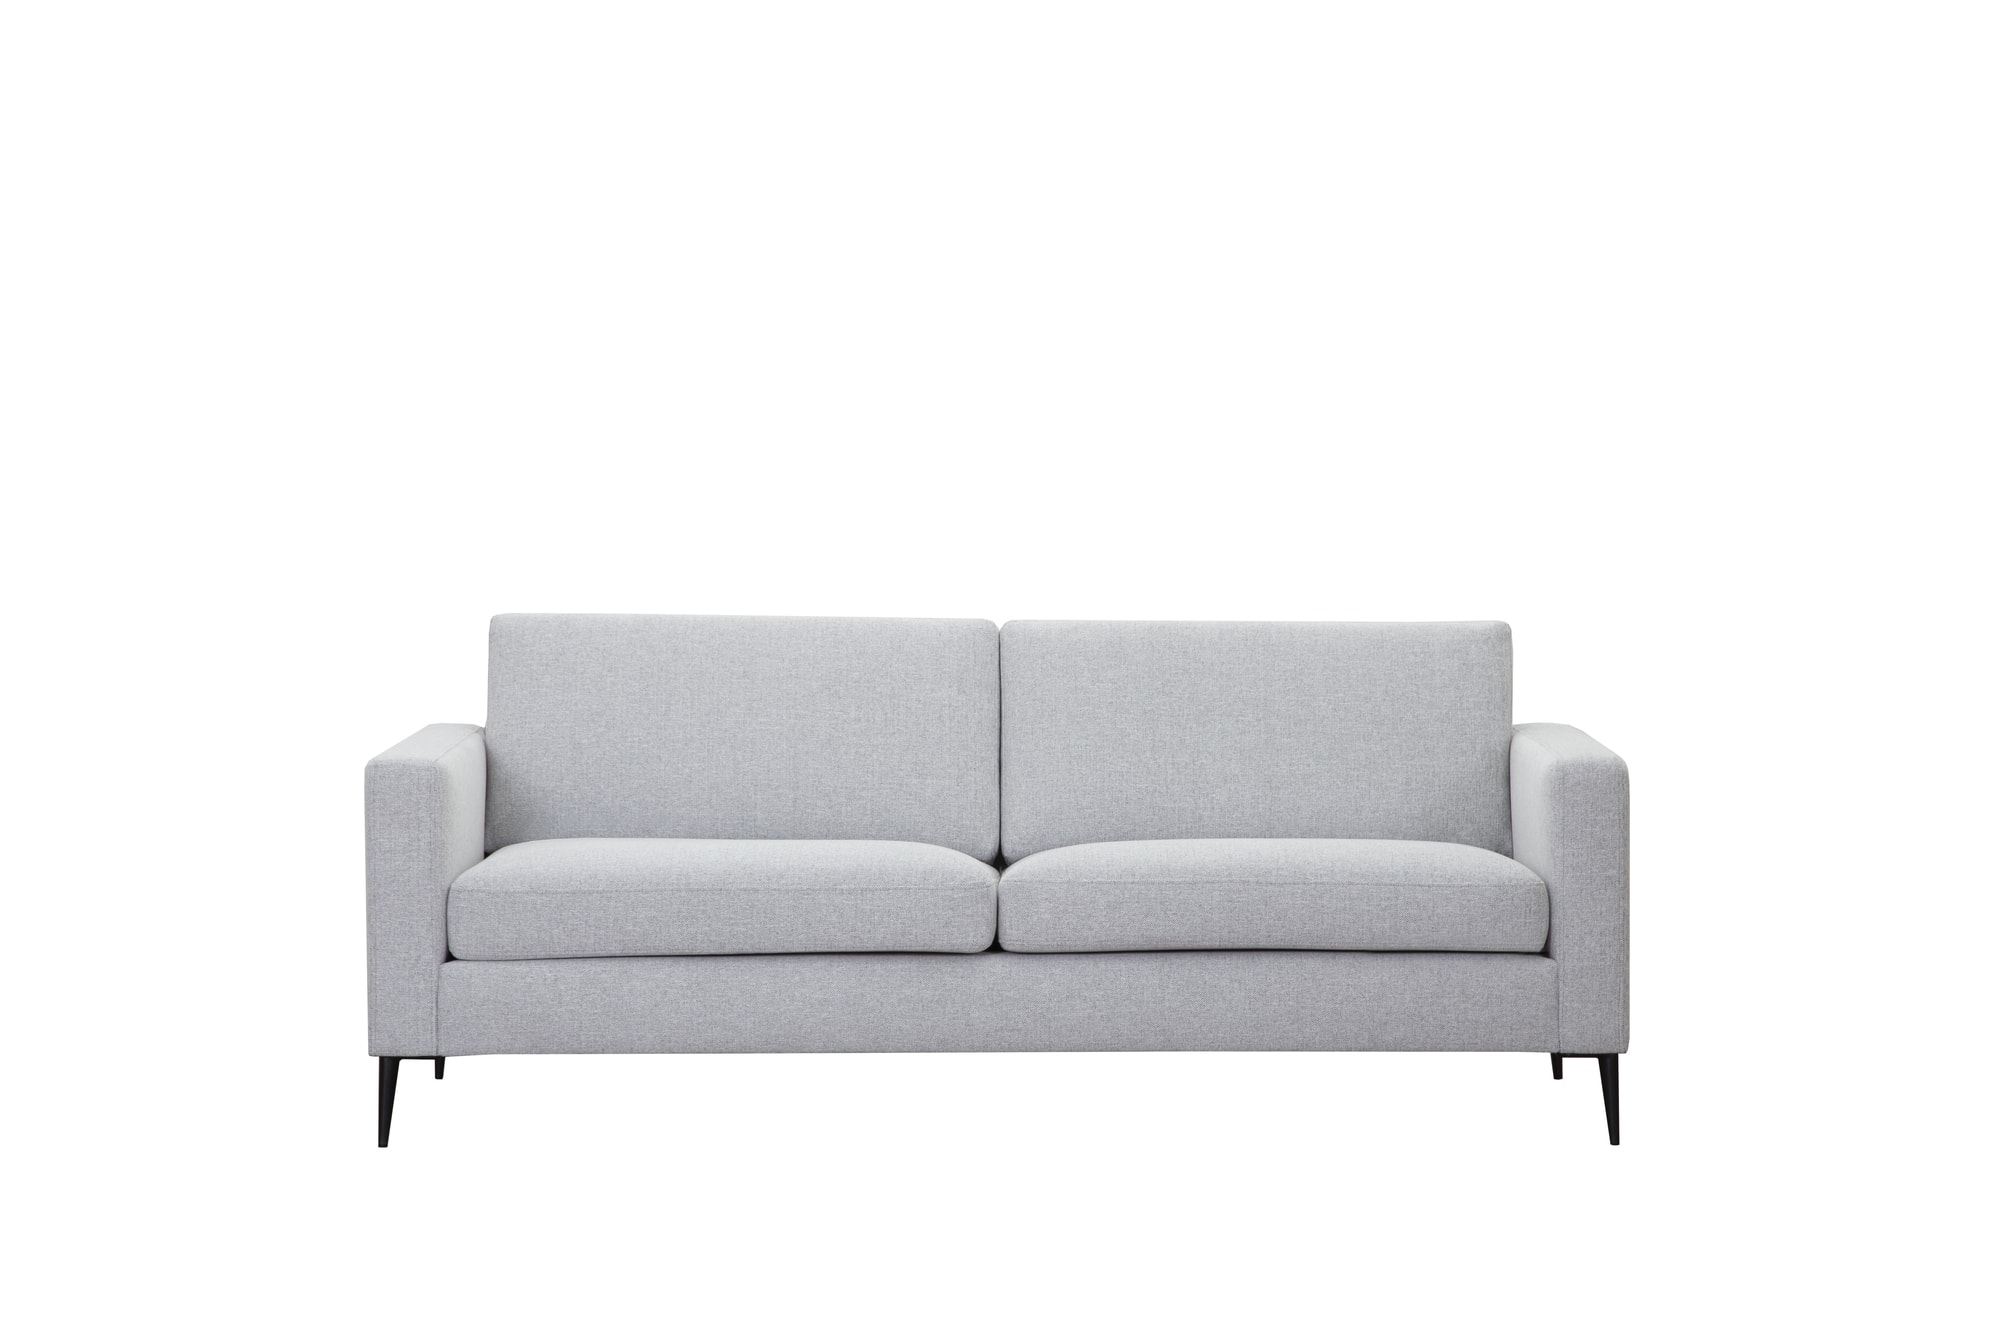 Skyldig Gymnast farvestof Nordic Sofa 🔍 Find New, New Products, Sale, Sofas at 🏡 Create Comfort